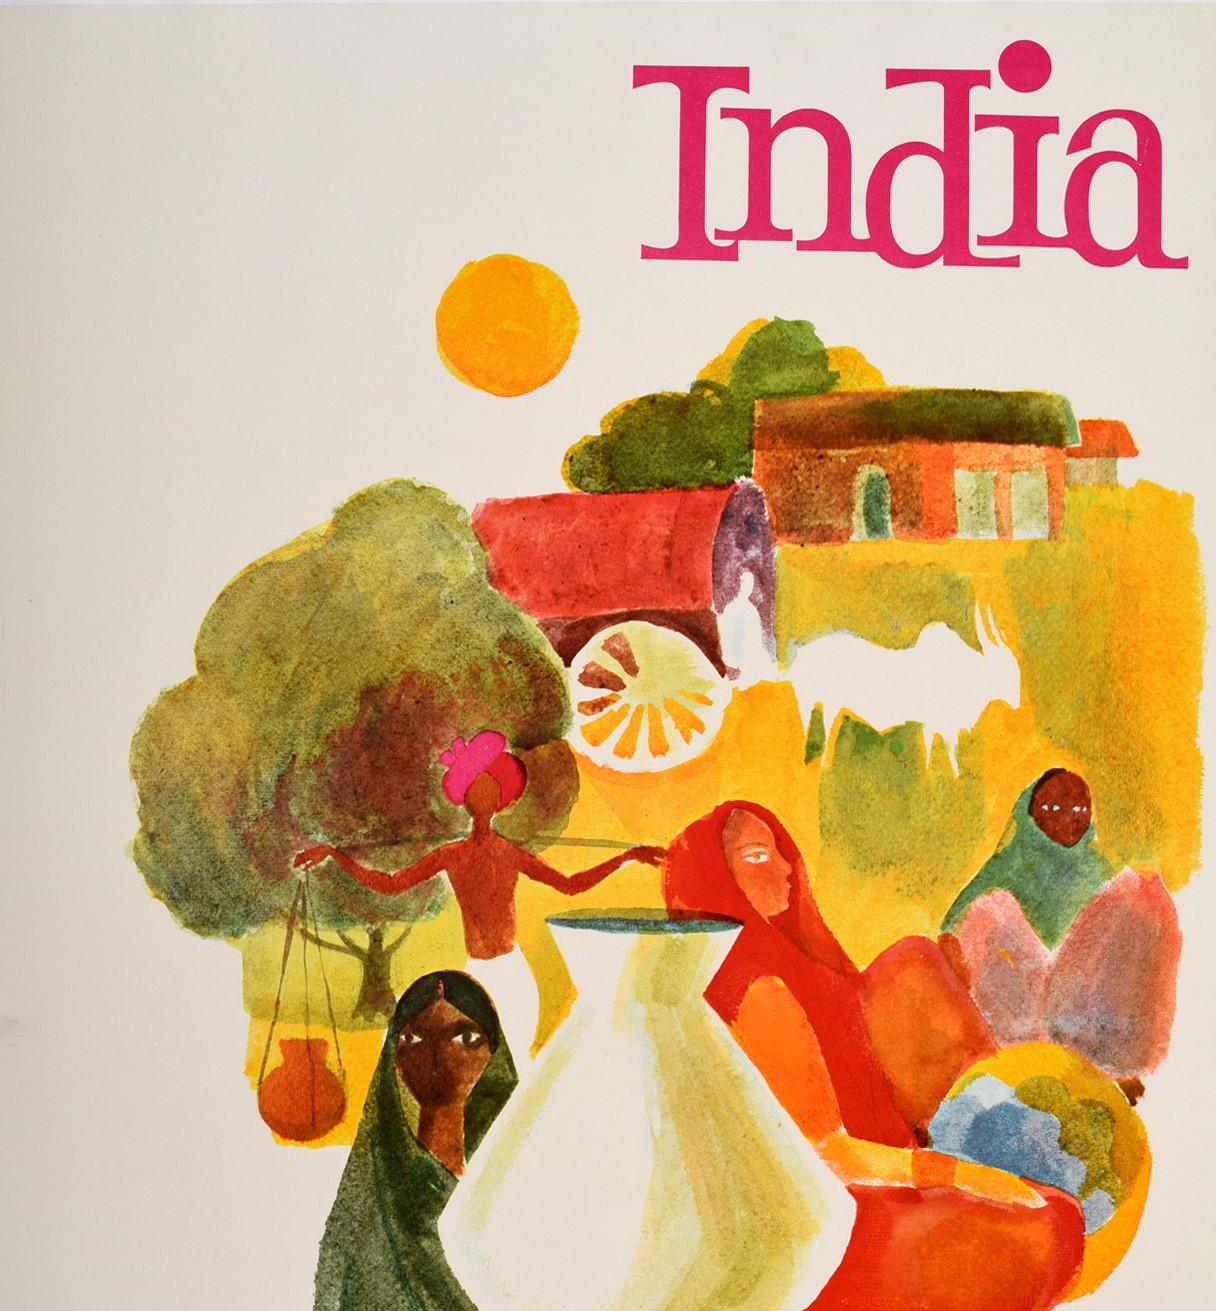 Original Vintage Travel Poster For India Feat Colourful Illustrations People Cow - Print by Unknown